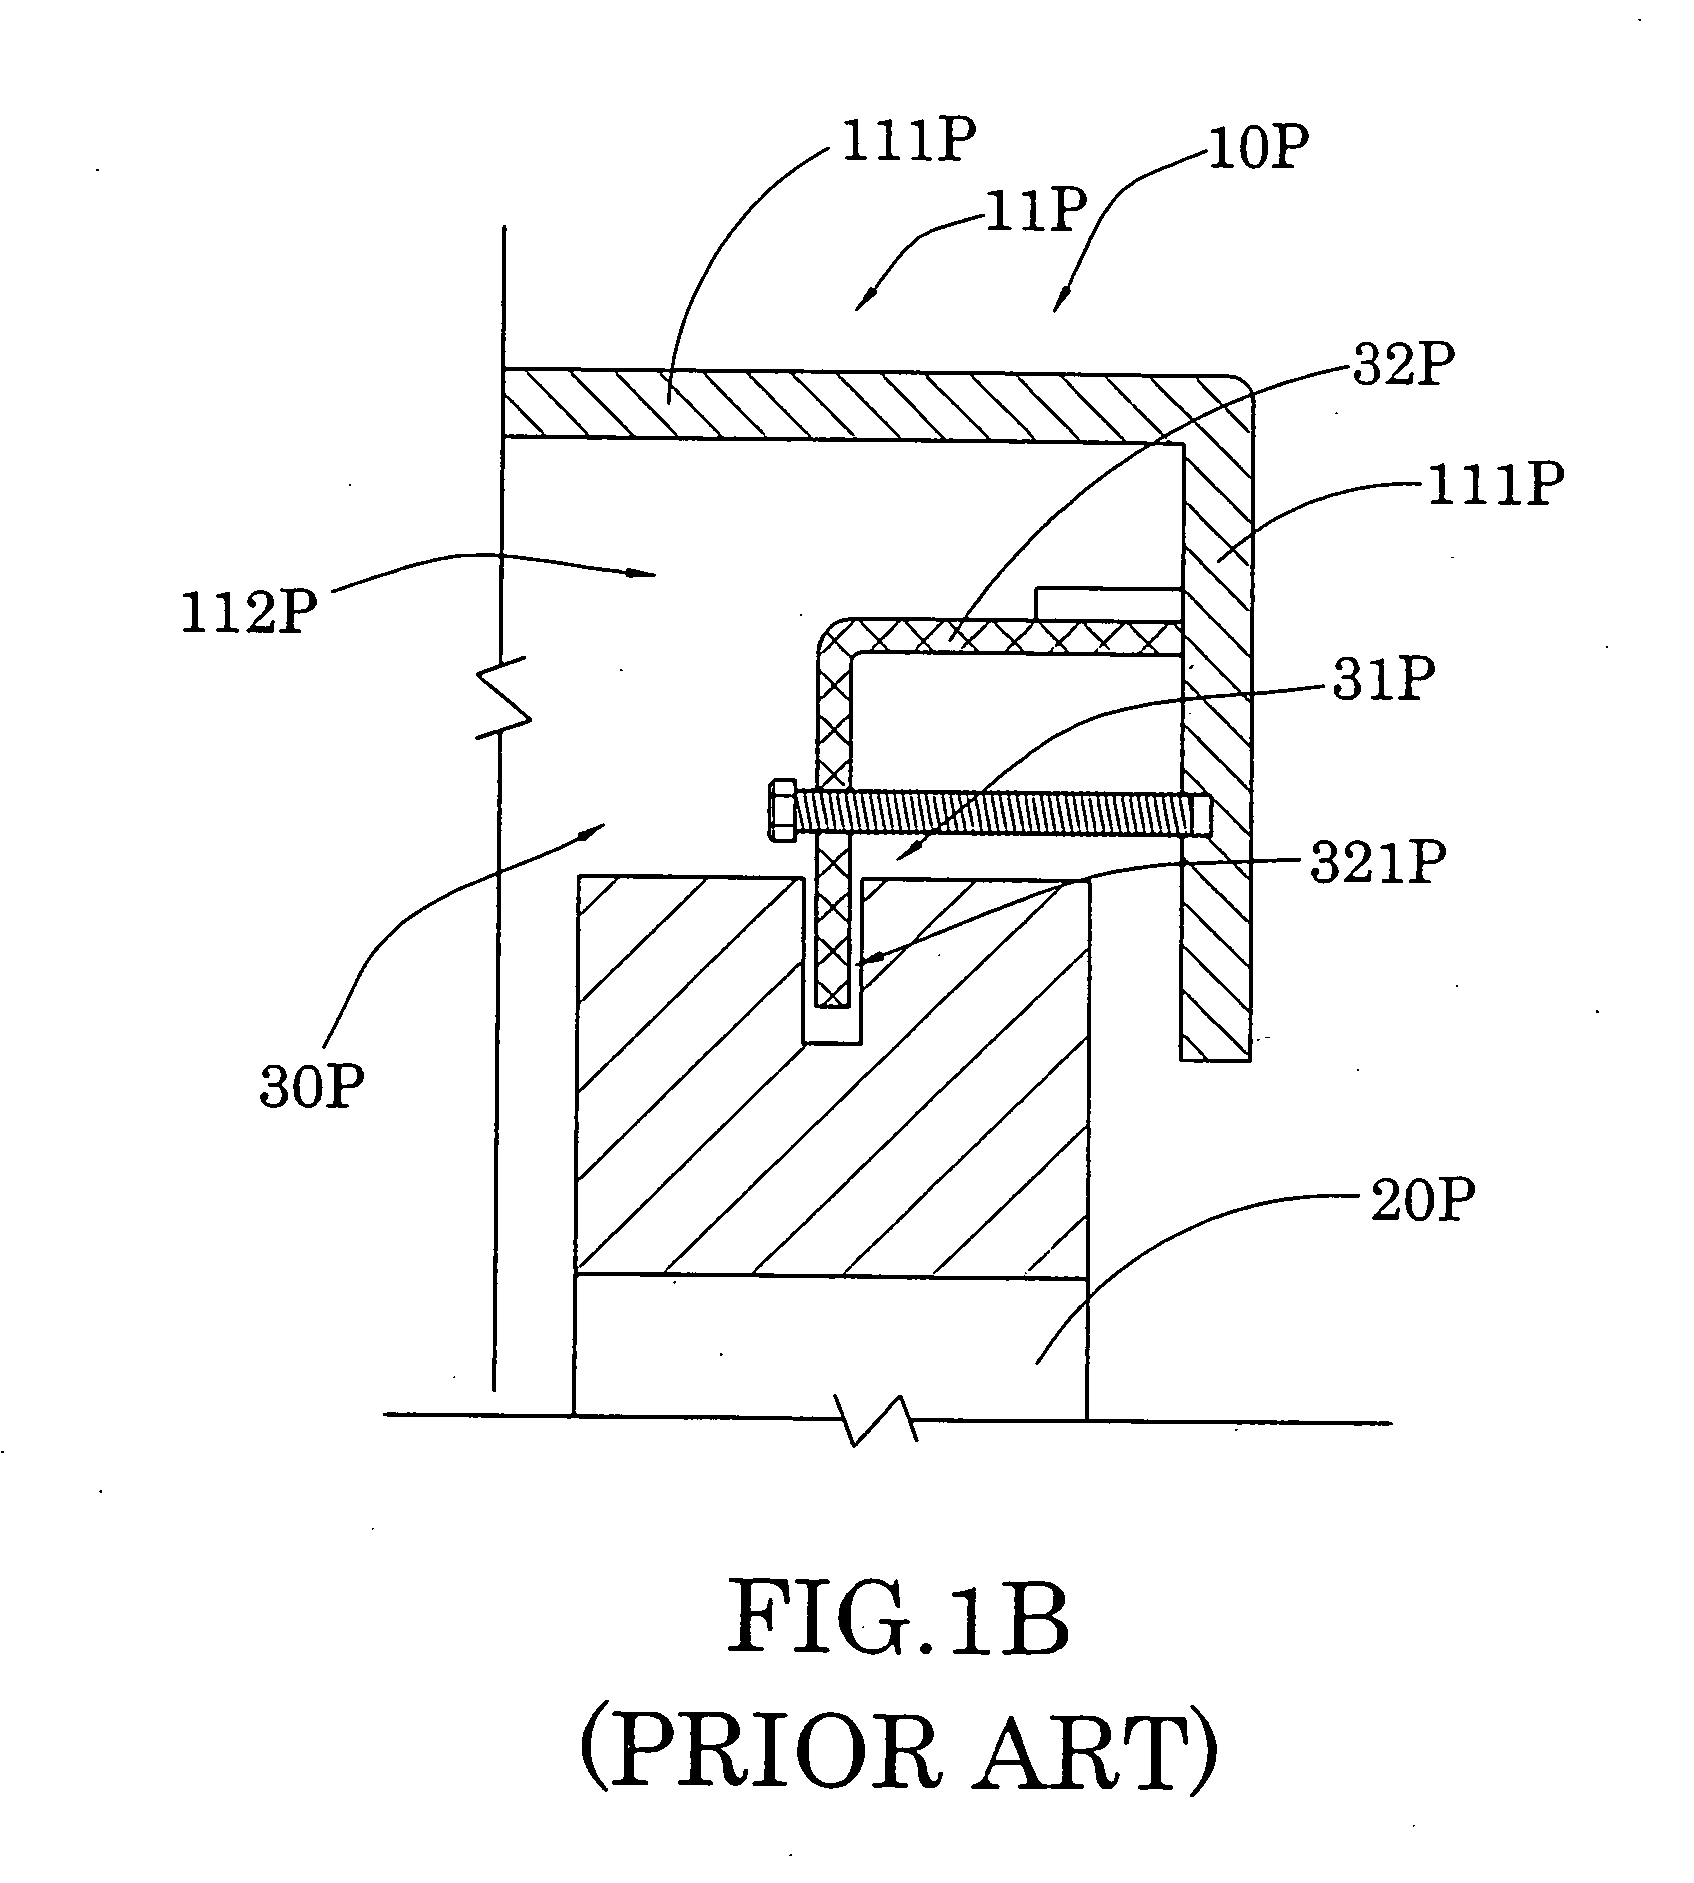 Wall panel affixing arrangement for portable work and storage container